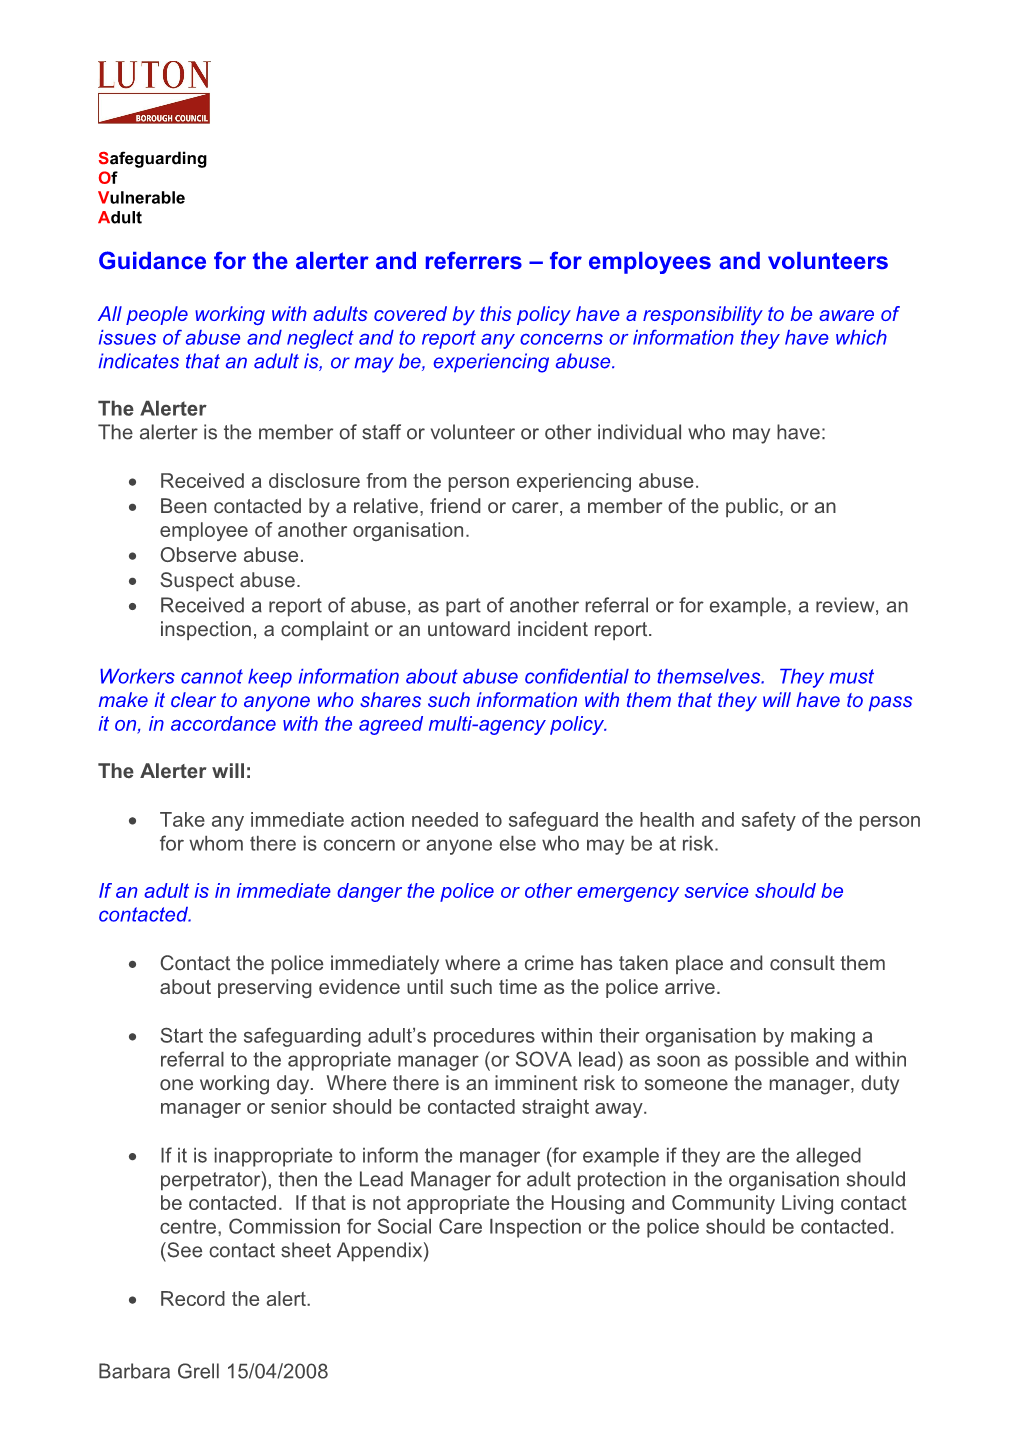 Guidance for the Alerter and Referrers for Employees and Volunteers